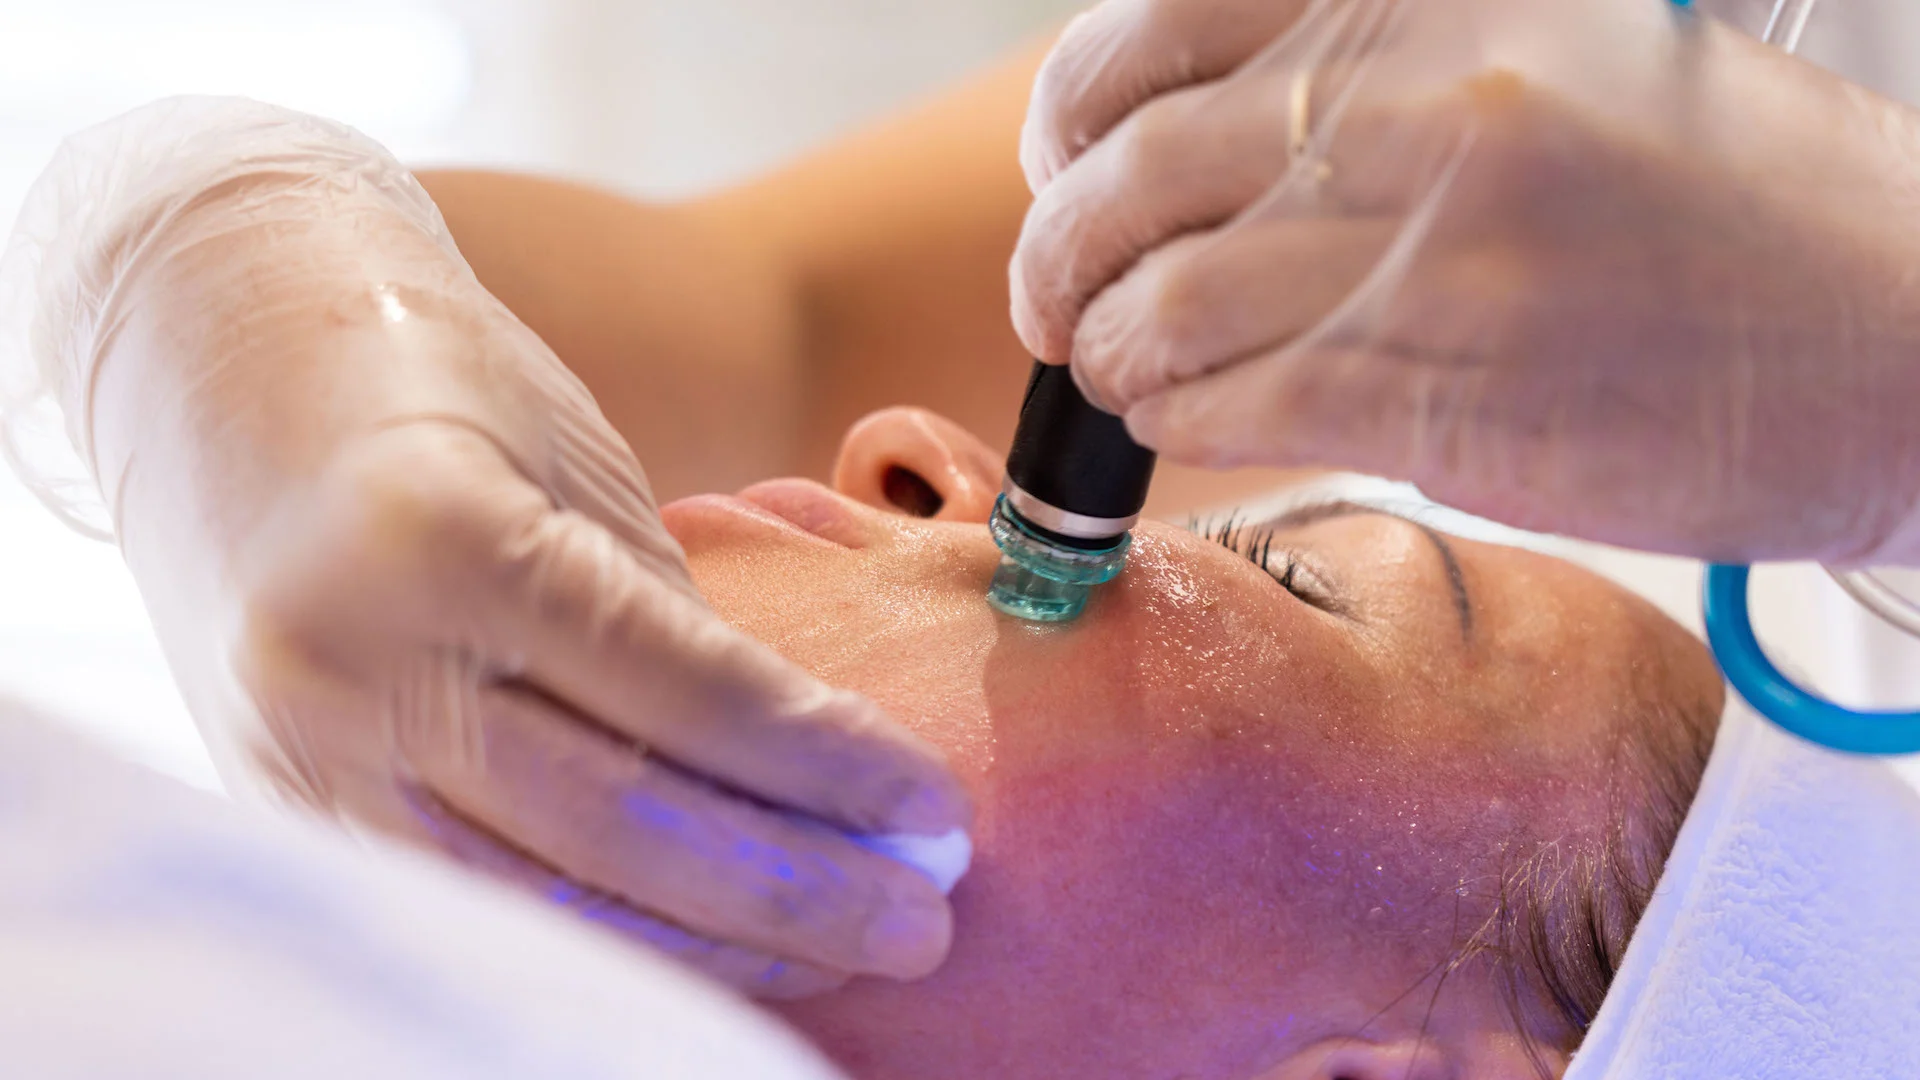 HydraFacial advanced treatment for supreme-looking skin - pamper your skin and make it radiant and smooth with gentle resurfacing hydra-dermabrasion procedure.